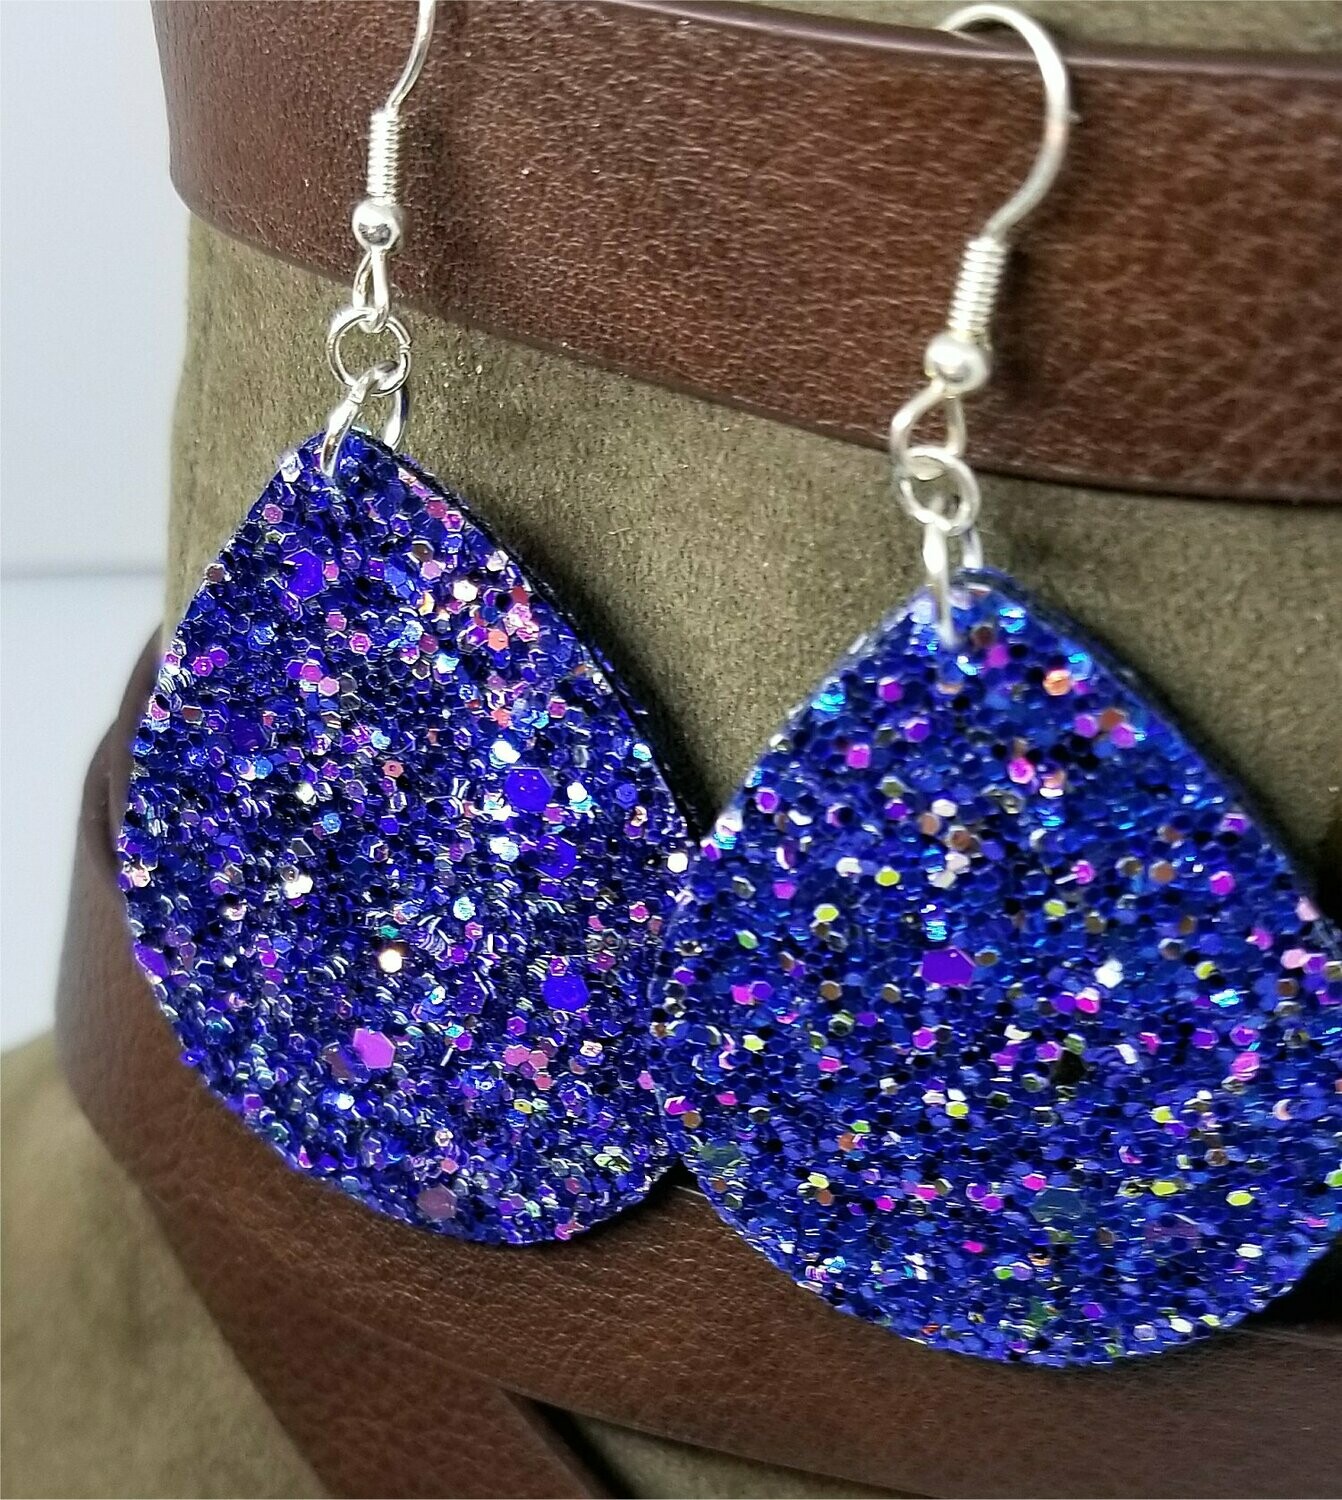 Blue Glitter Very Sparkly Double Sided FAUX Leather Teardrop Earrings with Color Shifting Chunky Glitter